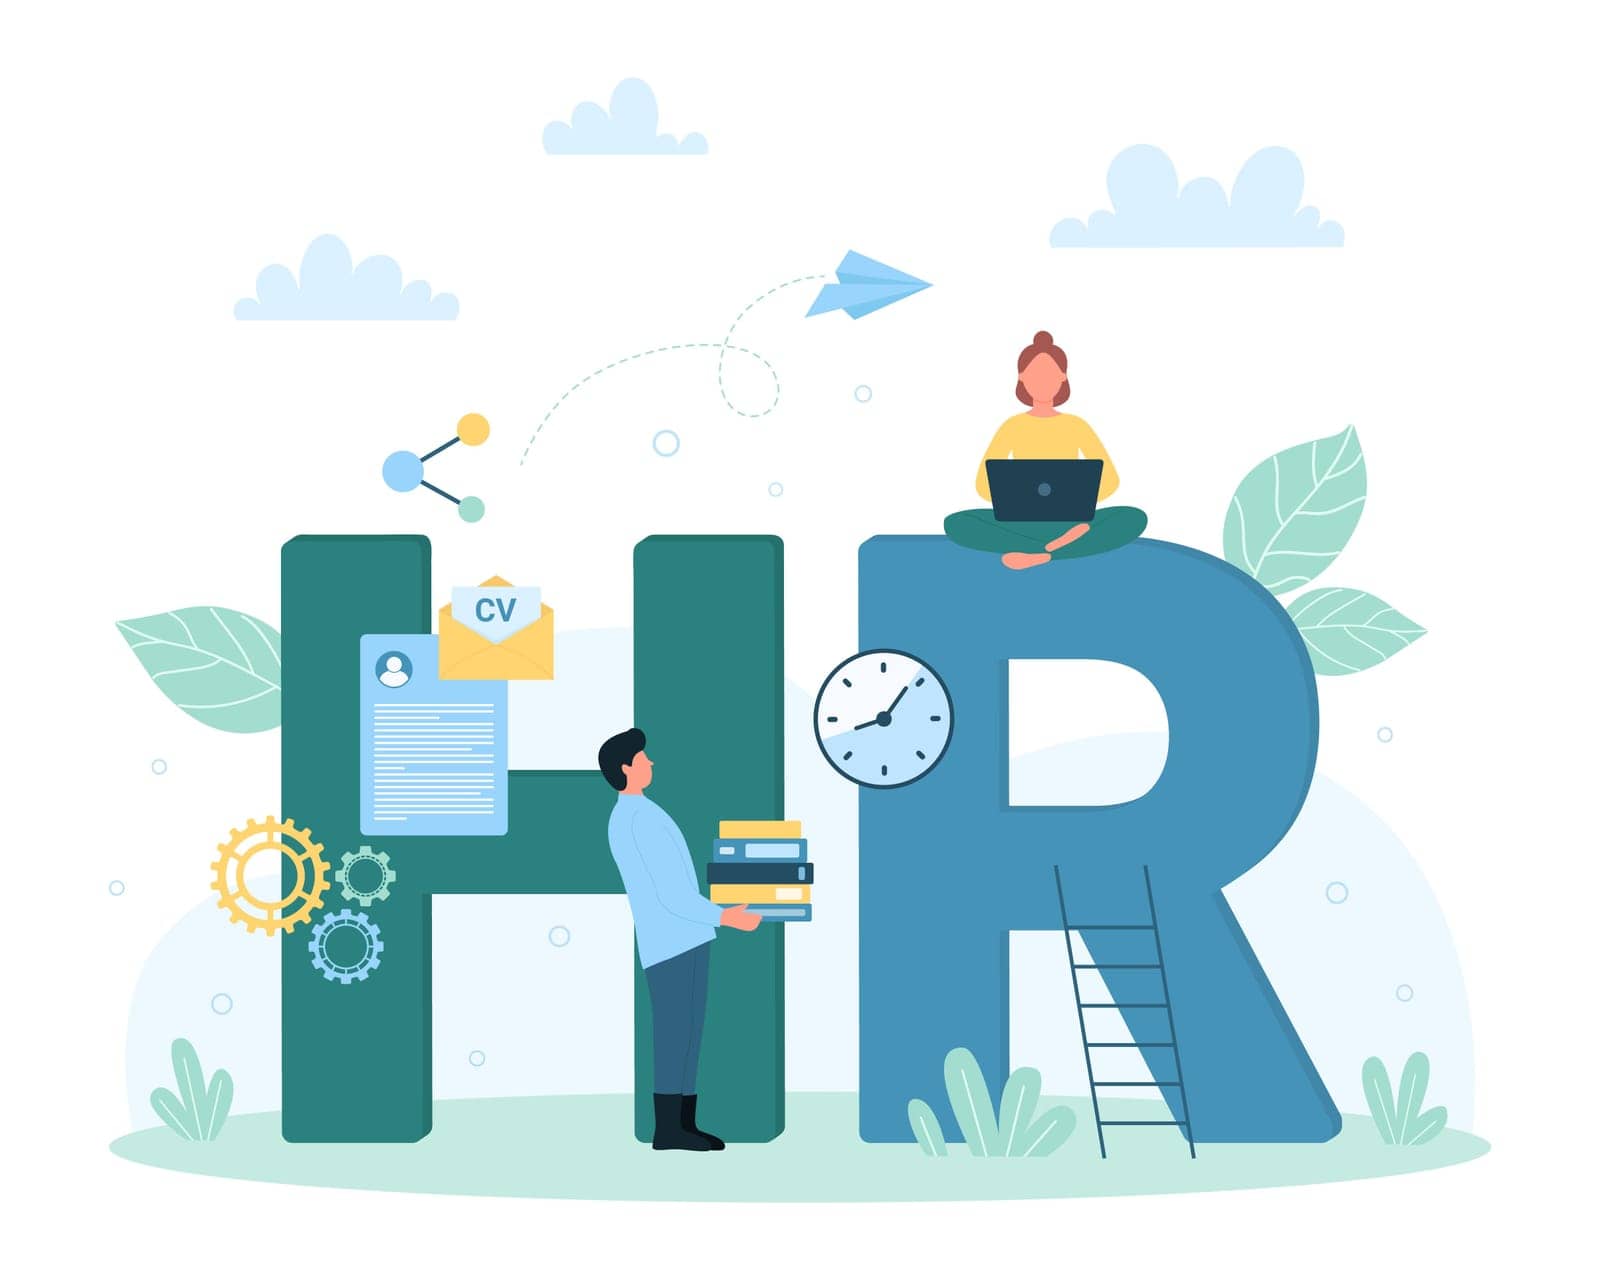 HR vector illustration. Cartoon tiny people search and choose best talent professional employee, work with CV documents, personnel resume and laptop near HR word, human resources management